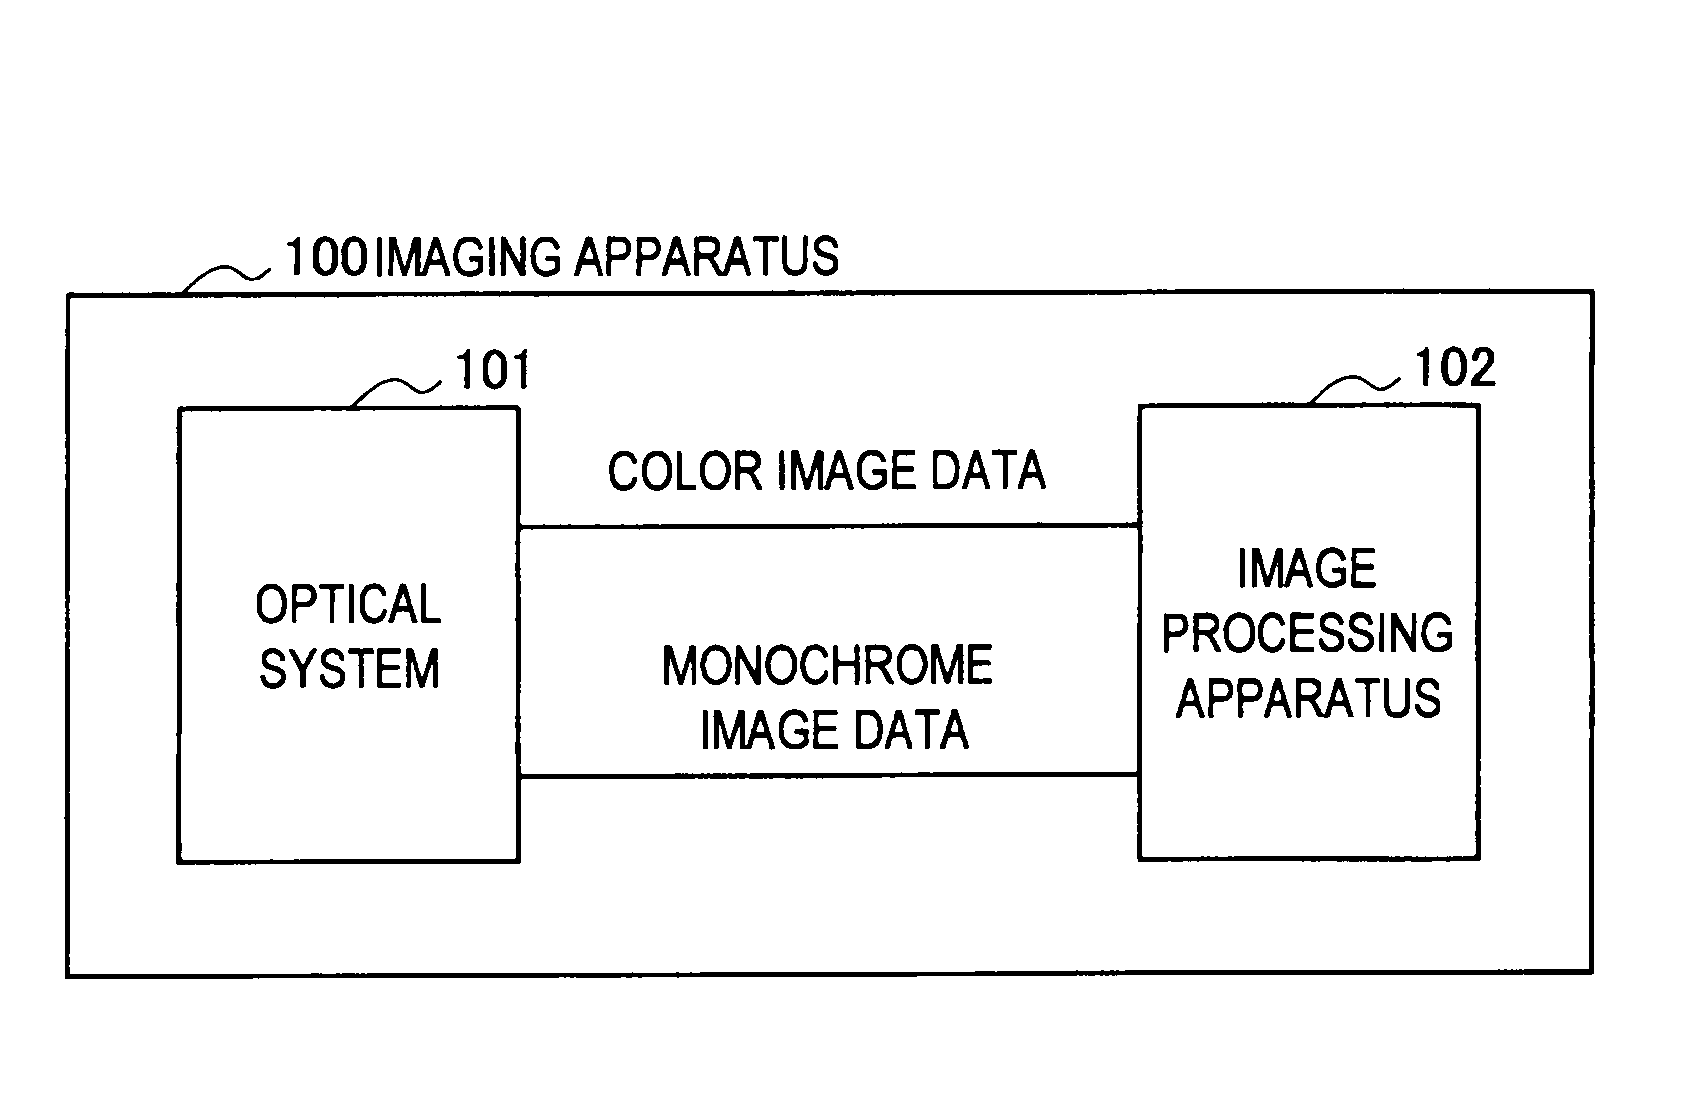 Imaging apparatus comprising color image pickup device and monochrome image pickup device